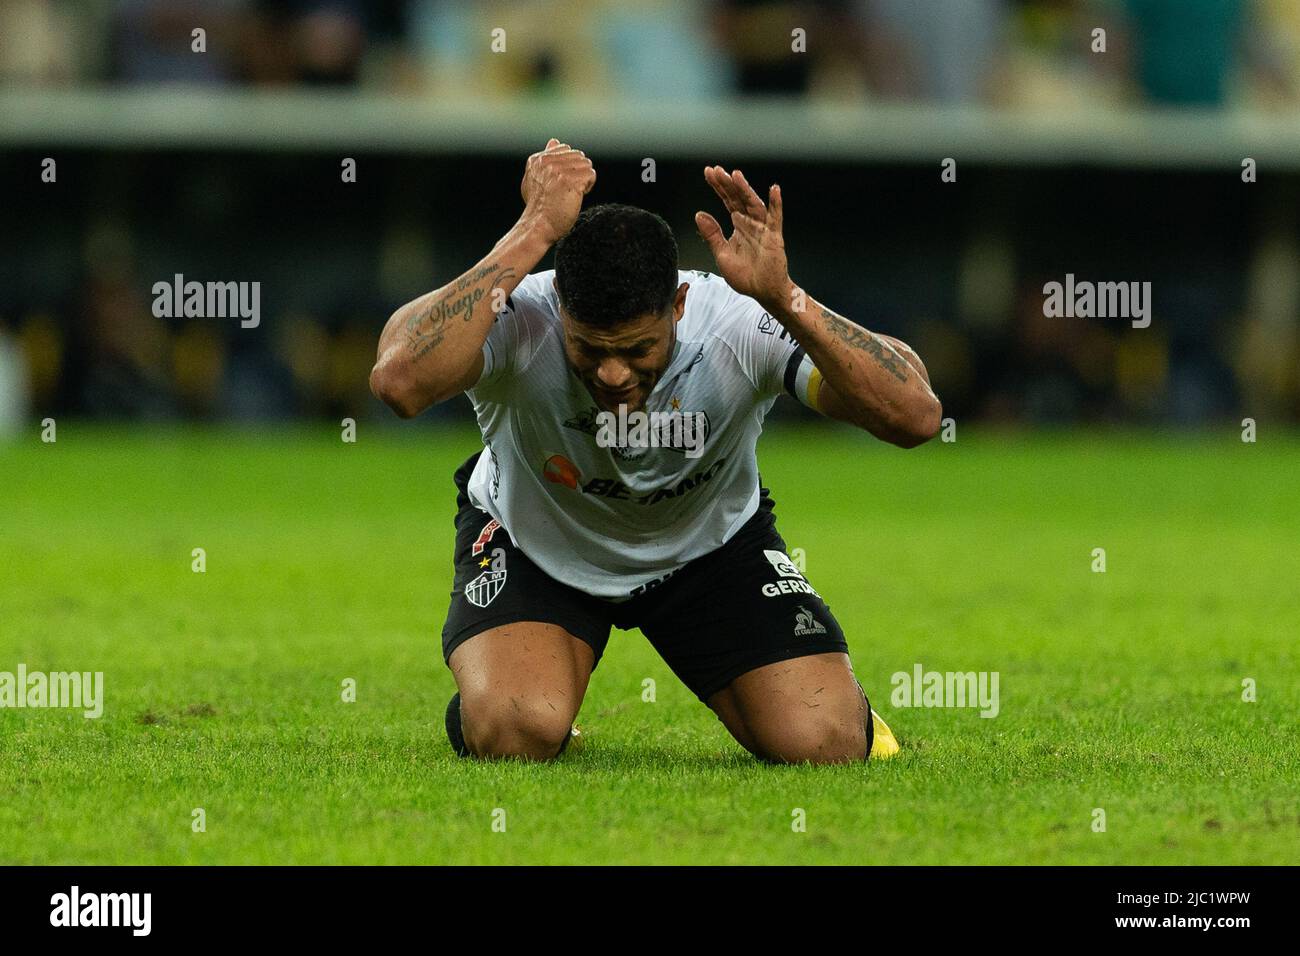 Rio De Janeiro, Brazil. 08th June, 2022. Hulk of Atletico-MG during the match between Fluminense and Atletico-MG as part of Brasileirao Serie A 2022 at Maracana Stadium on June 08, 2022 in Rio de Janeiro, Brazil. This game is valid for the third of thirty-eight rounds of the Brasileirao Serie A 2022. (Photo by Ruano Carneiro/Carneiro Images/Sipa USA) Credit: Sipa USA/Alamy Live News Stock Photo